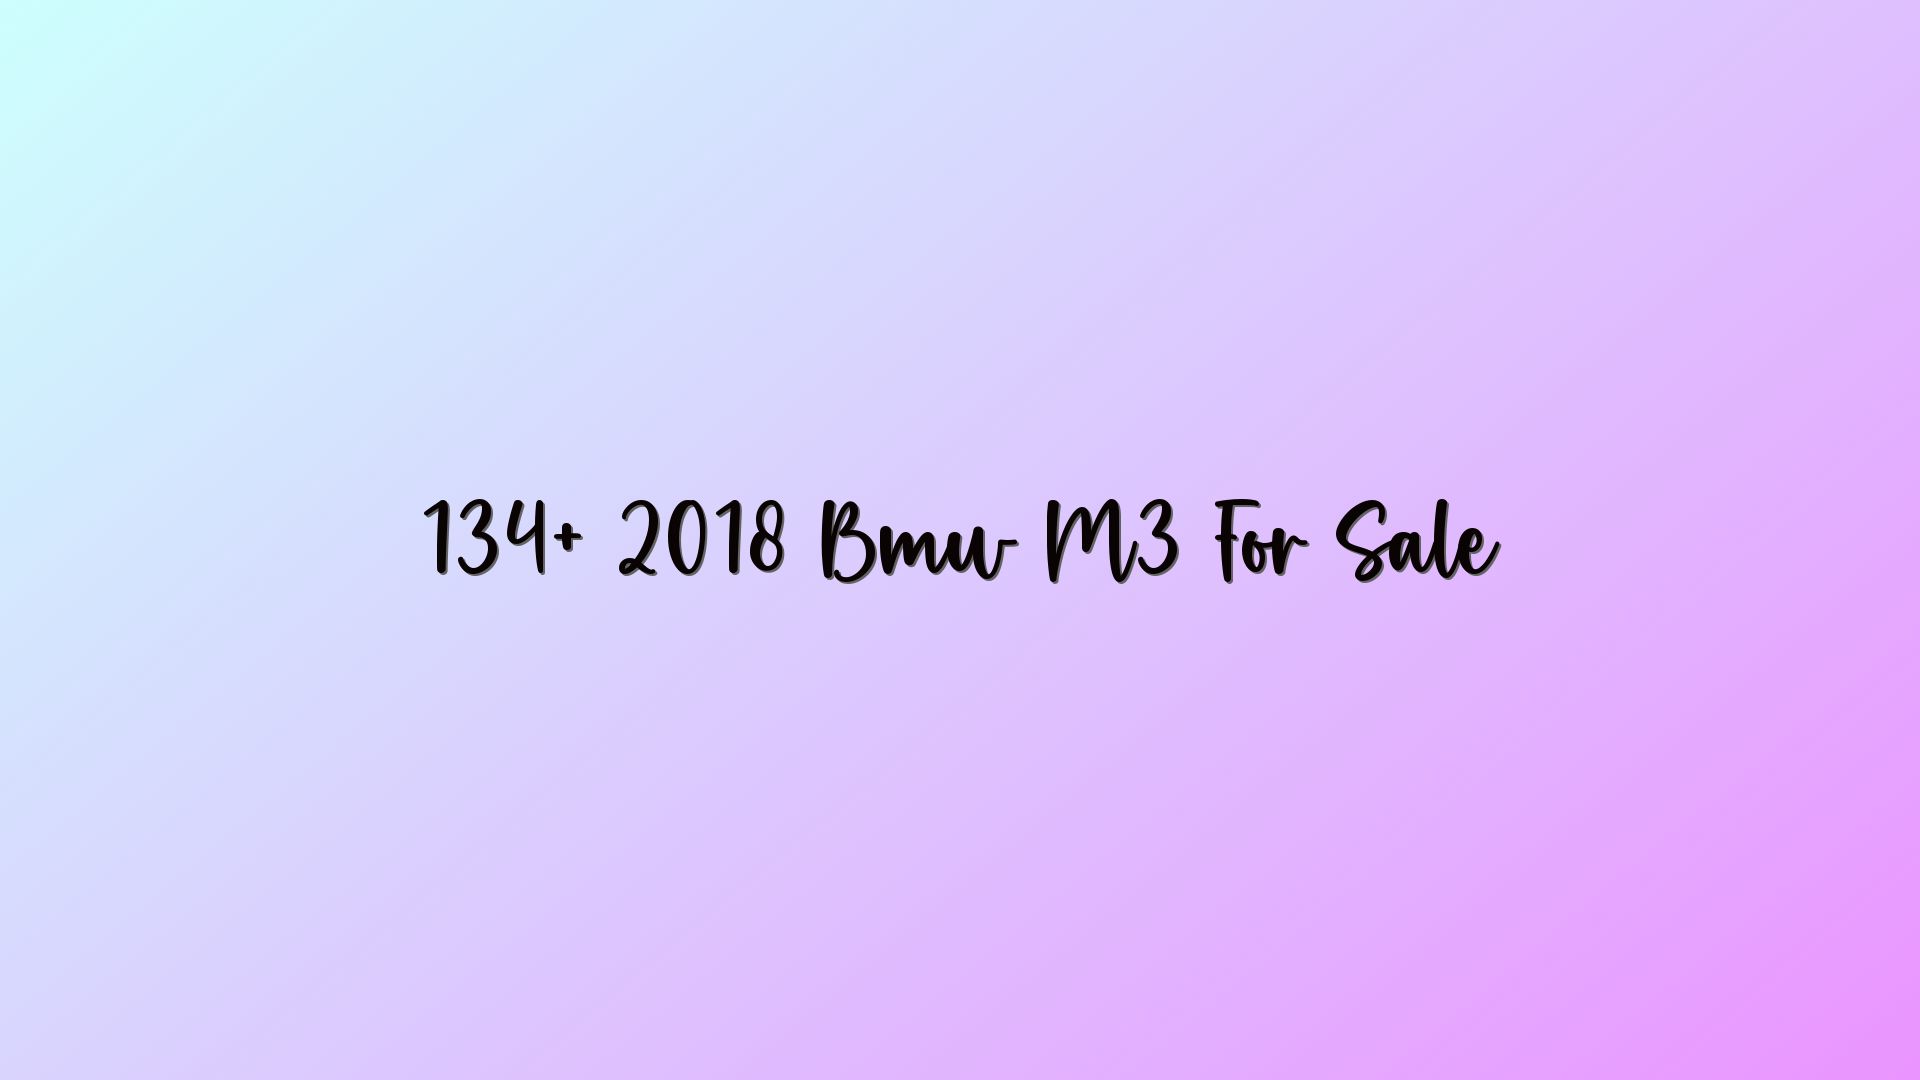 134+ 2018 Bmw M3 For Sale